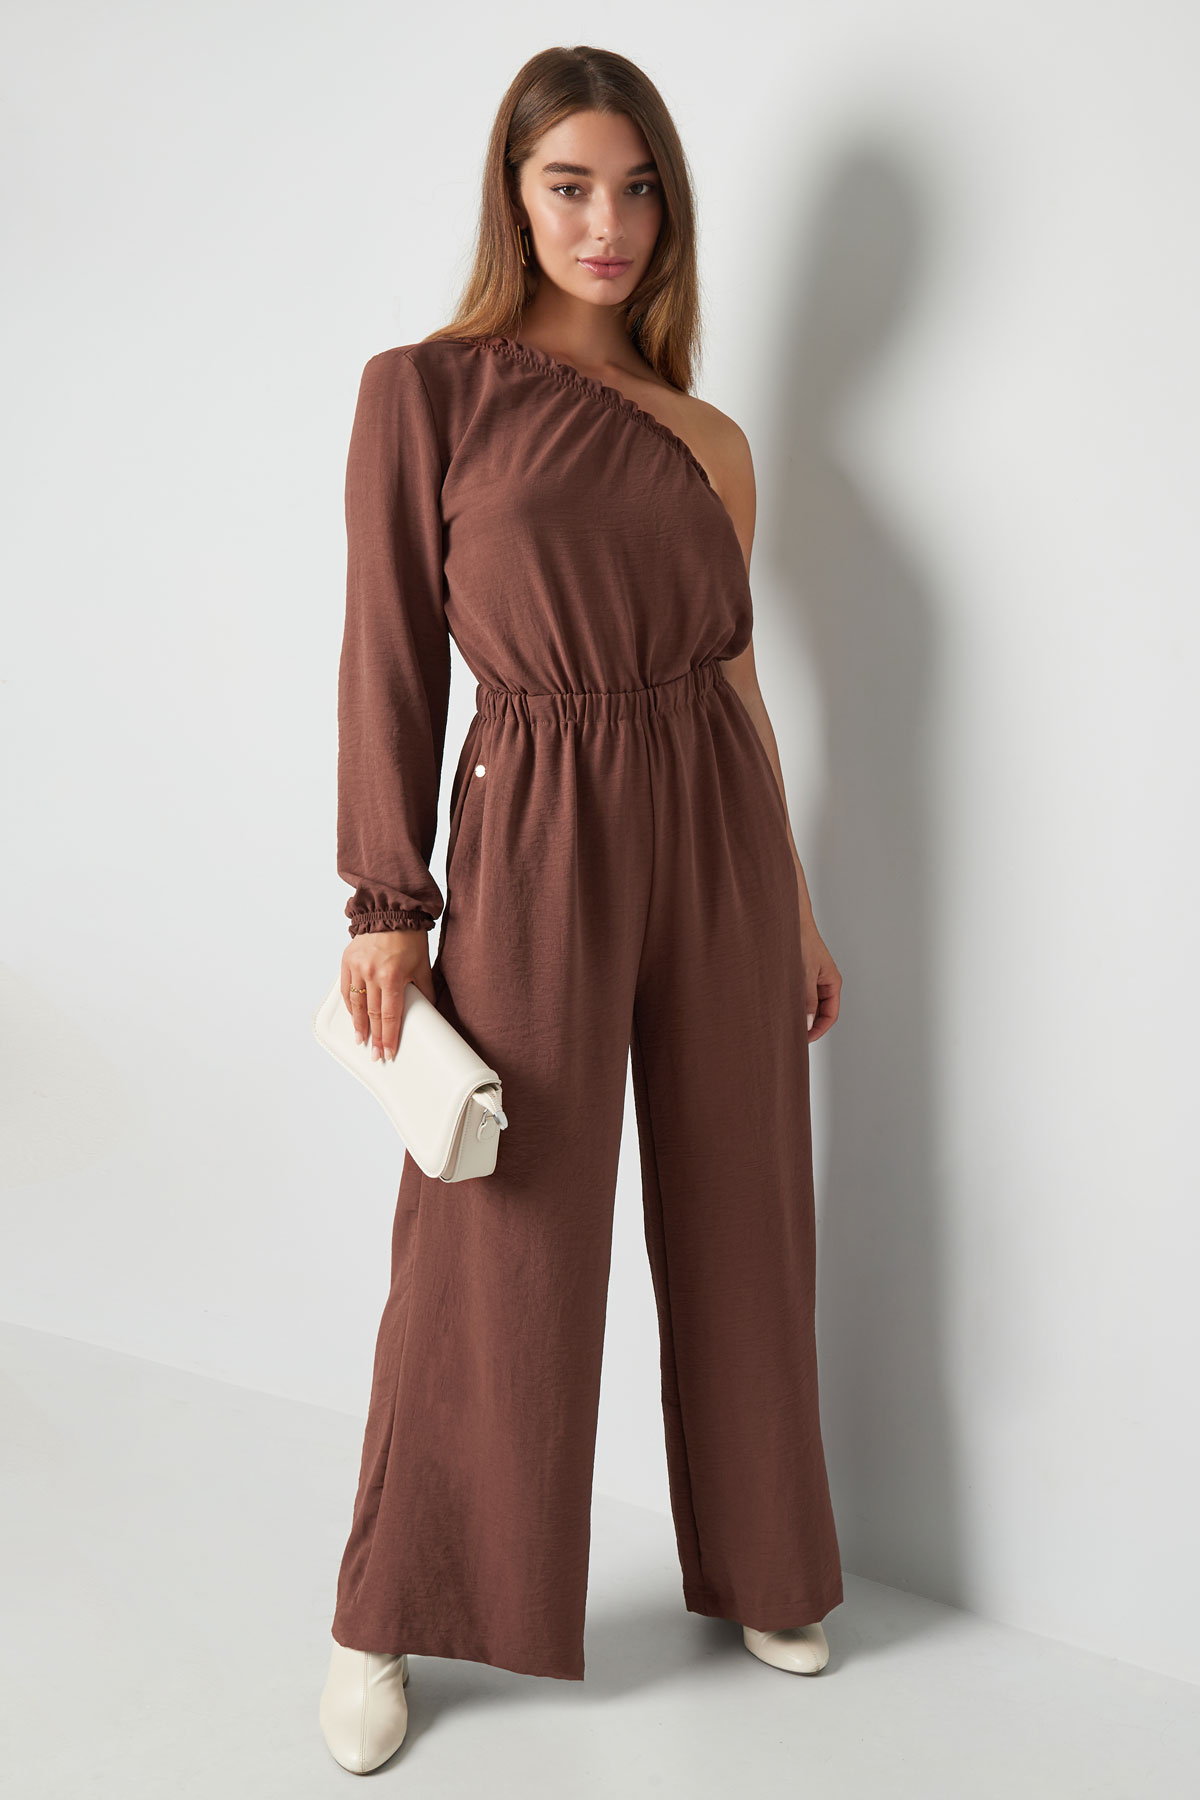 Jumpsuit one-shoulder - mustard yellow h5 Picture4